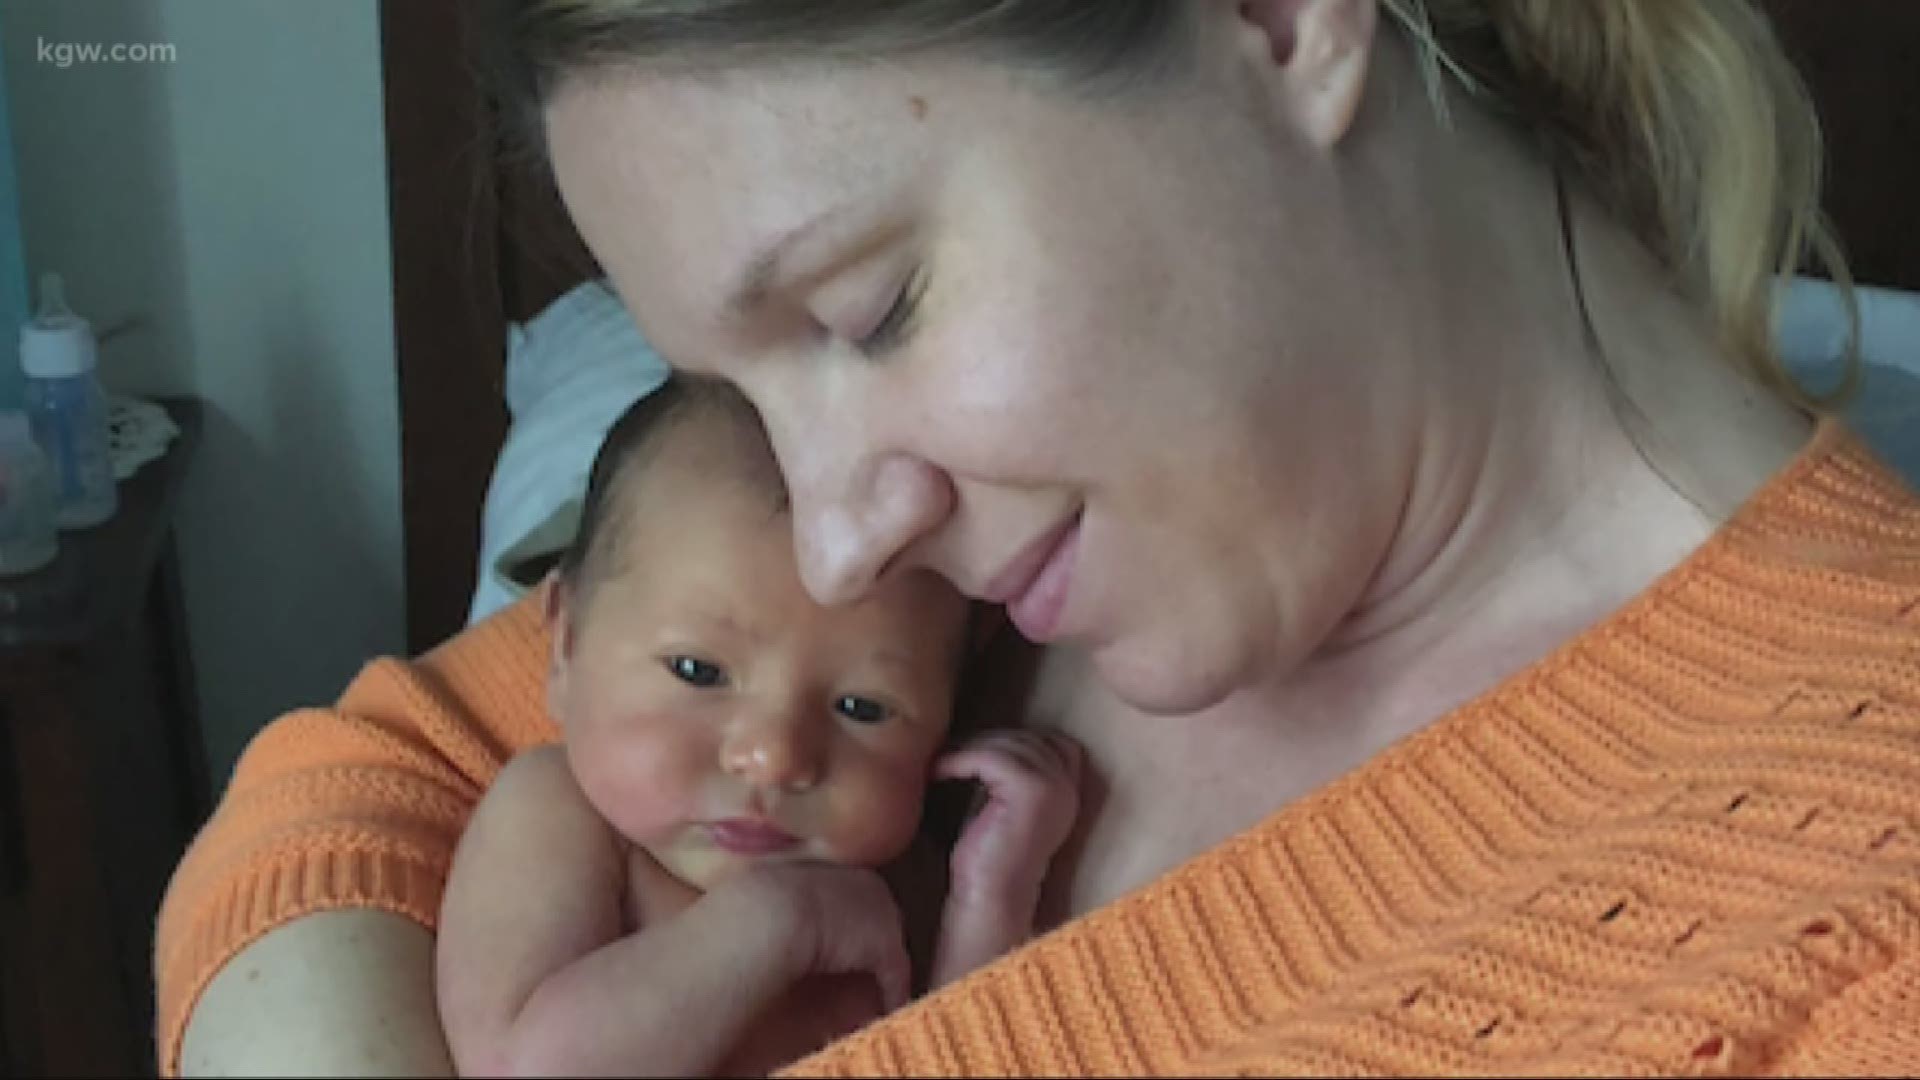 A mother is raising awareness after her baby died suddenly of meningitis.